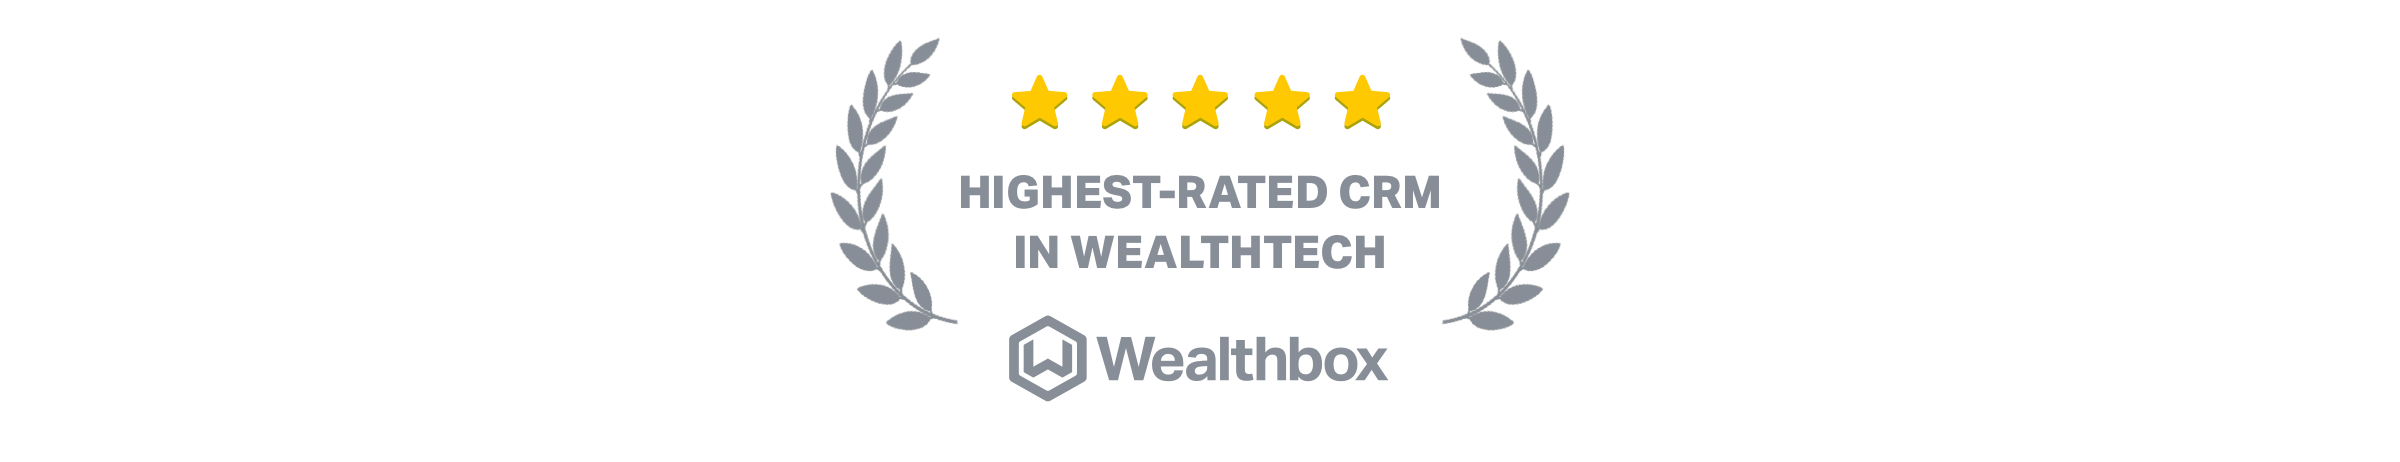 Wealthbox is the highest-rated CRM in Wealthtech